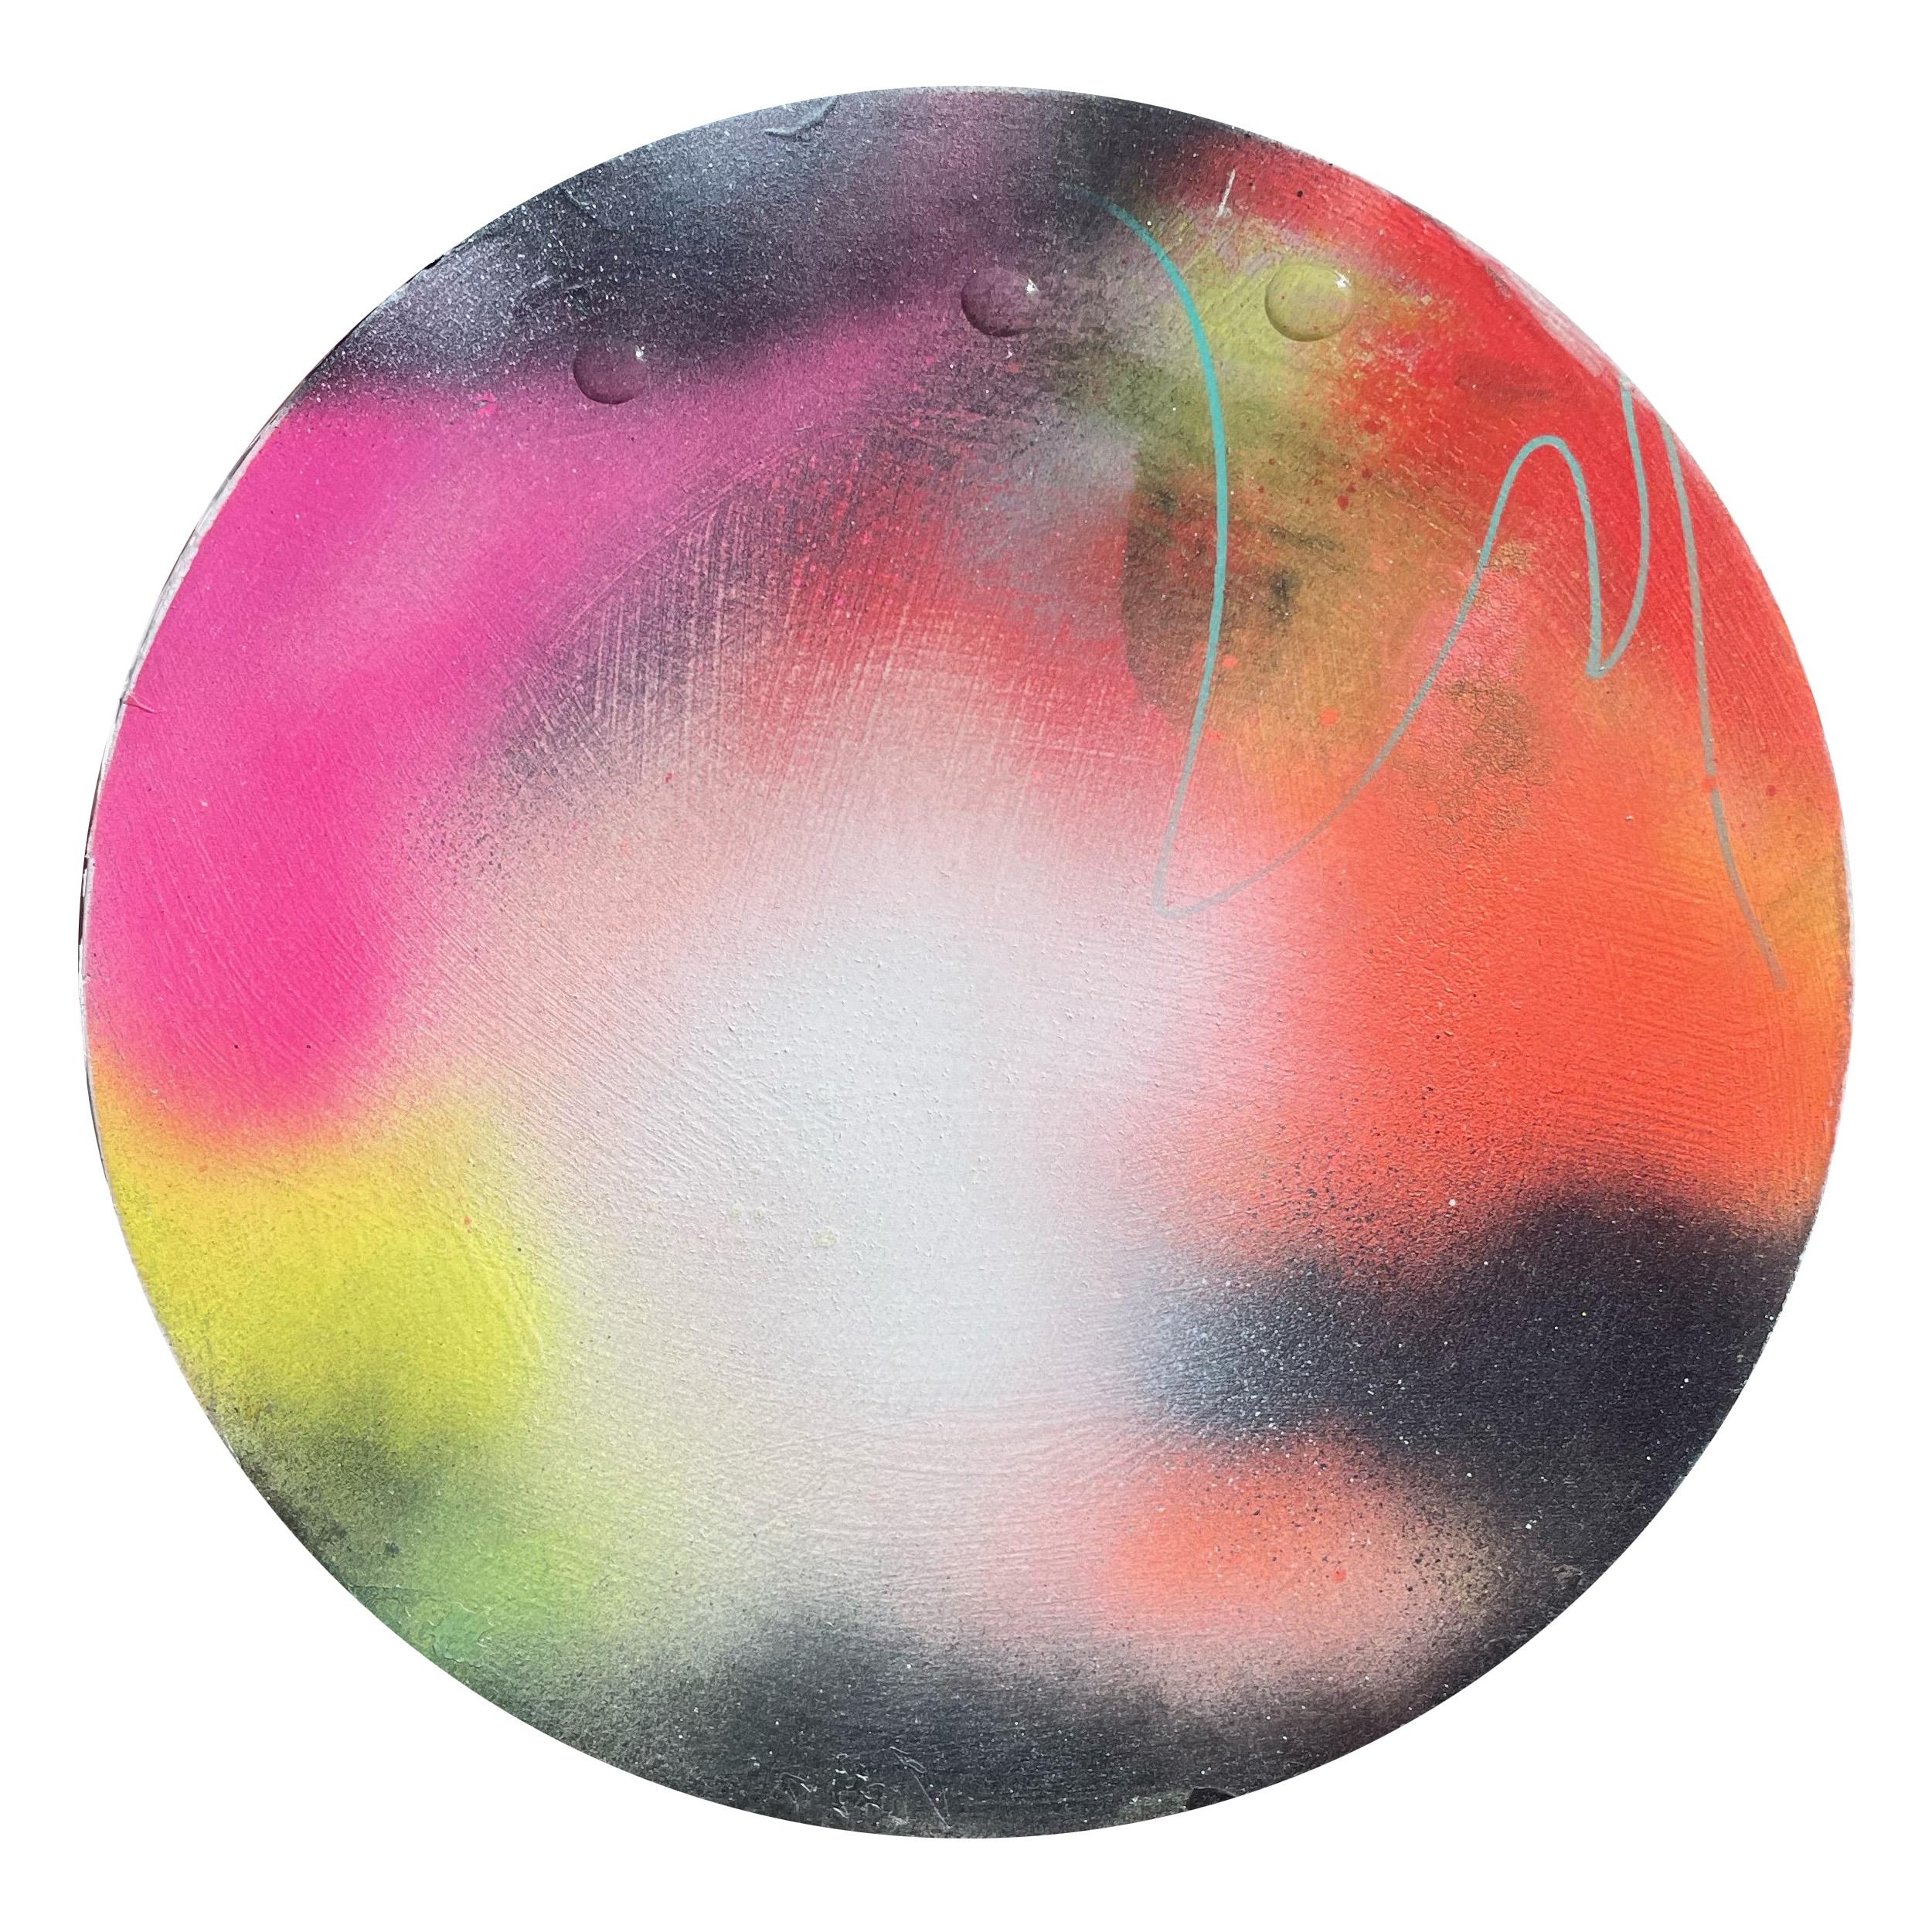 "Pearly Dewdrops 6" Contemporary Colorful Abstract Circular Painting